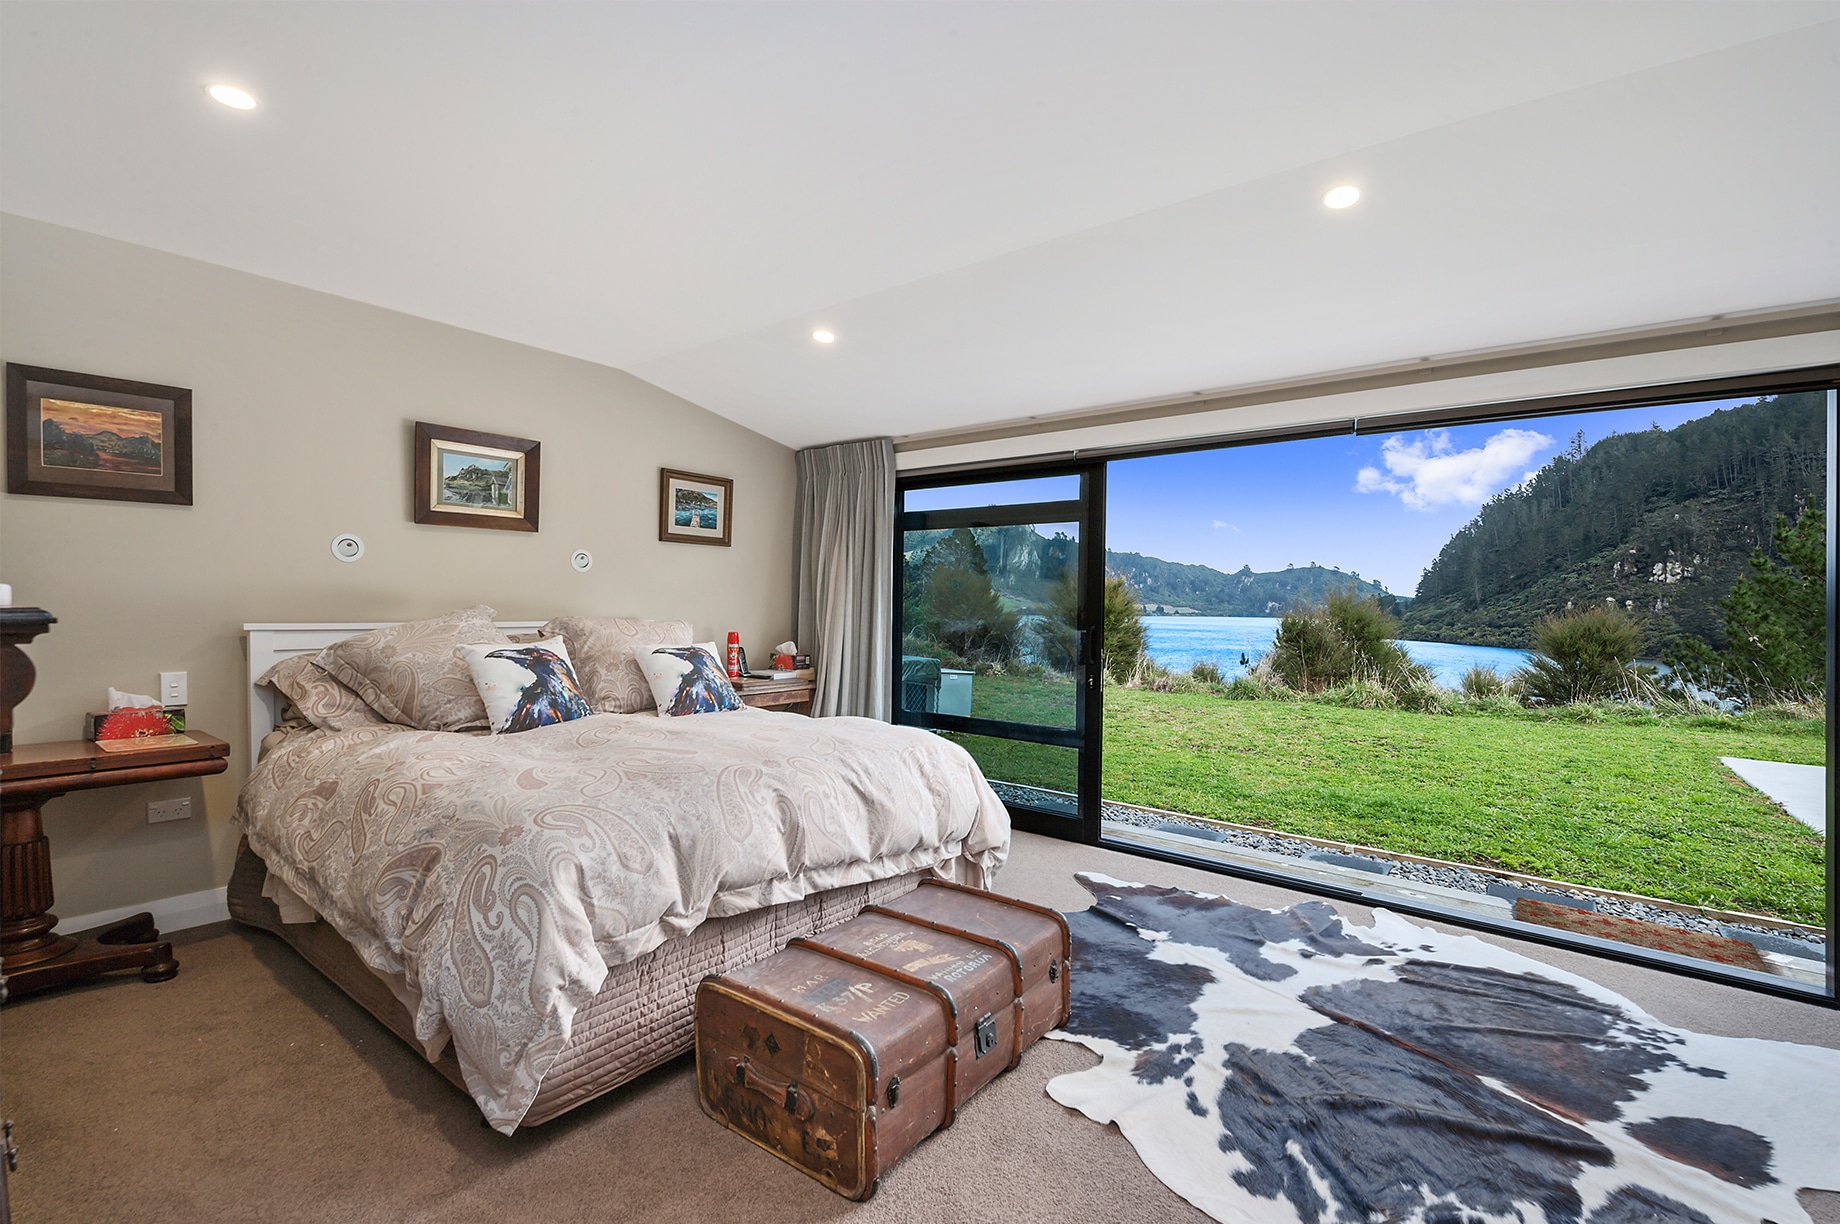 Mater bedroom with a lake view